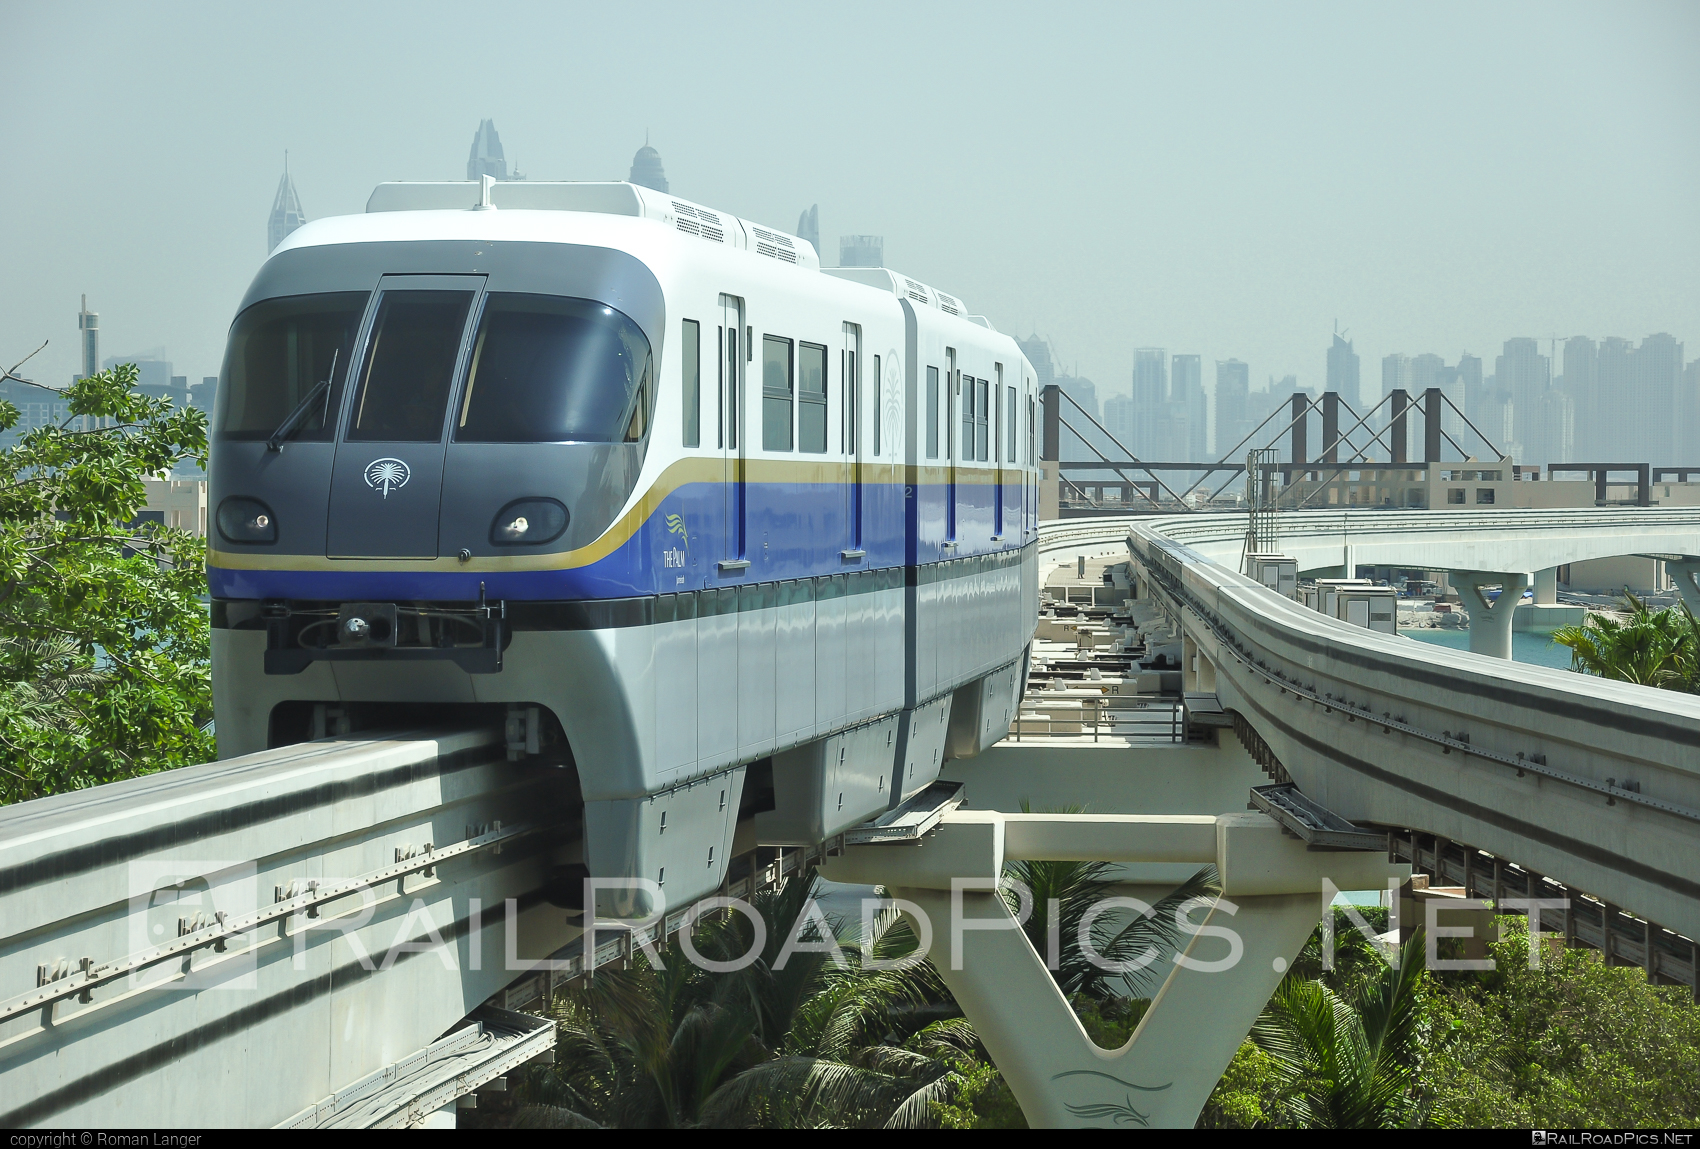 Hitachi Palm Jumeirah Monorail - Unknown vehicle ID operated by Serco Middle East #PalmJumeirahMonorail #SercoMiddleEast #hitachi #serco #sercogroup